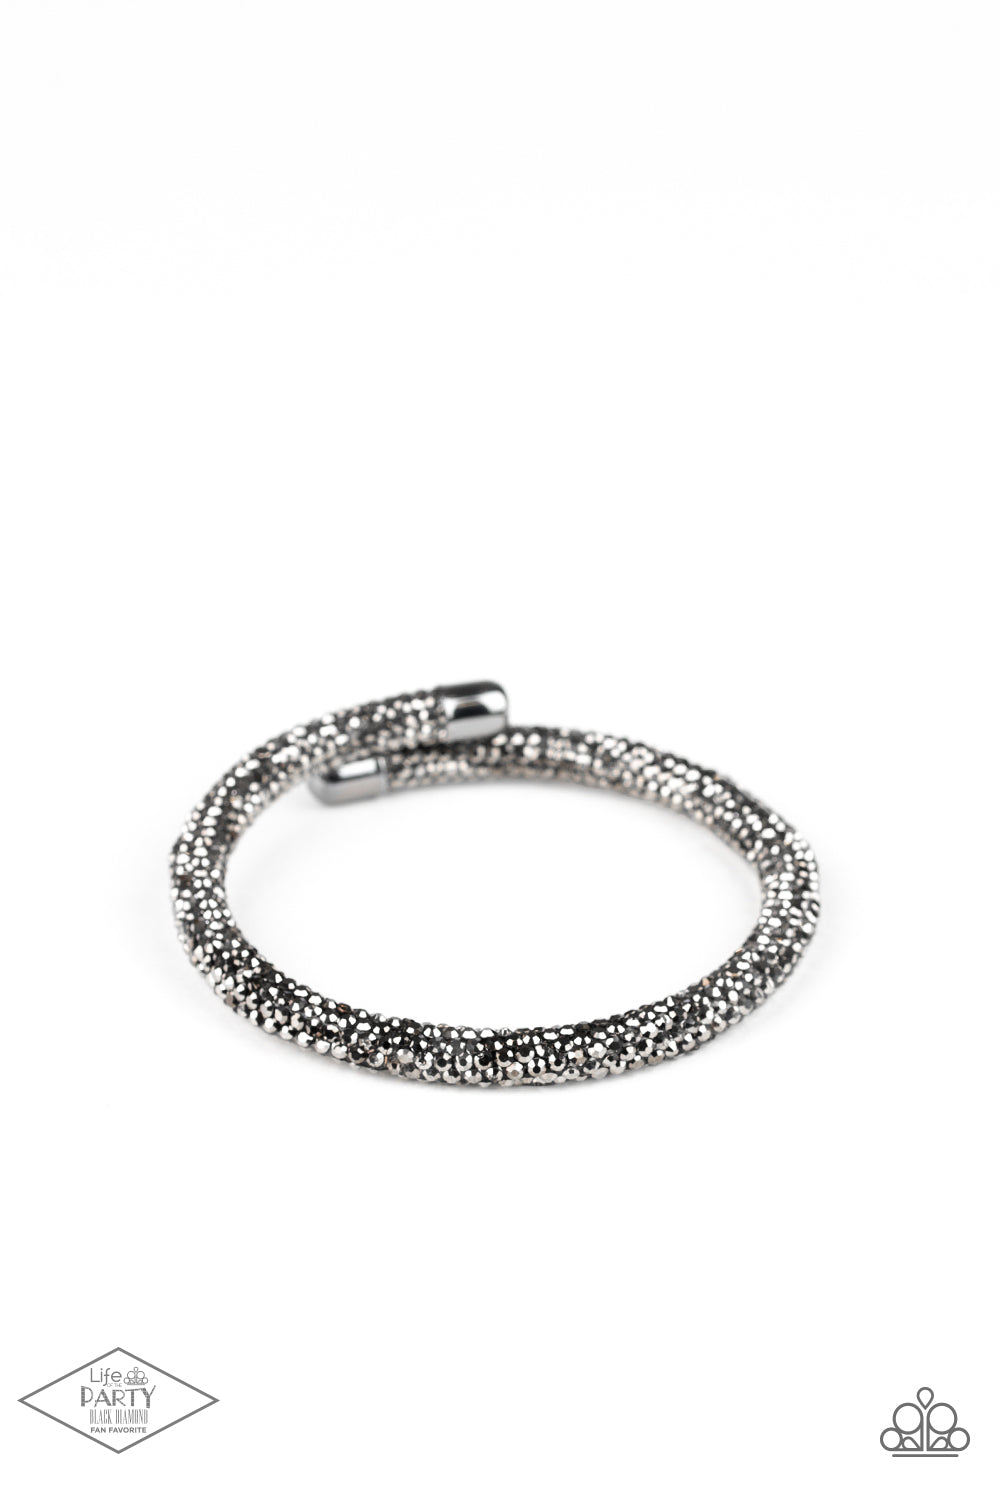 Paparazzi Stageworthy Sparkle Black Coil Wrap Bracelet - Life Of The Party Exclusive 2020